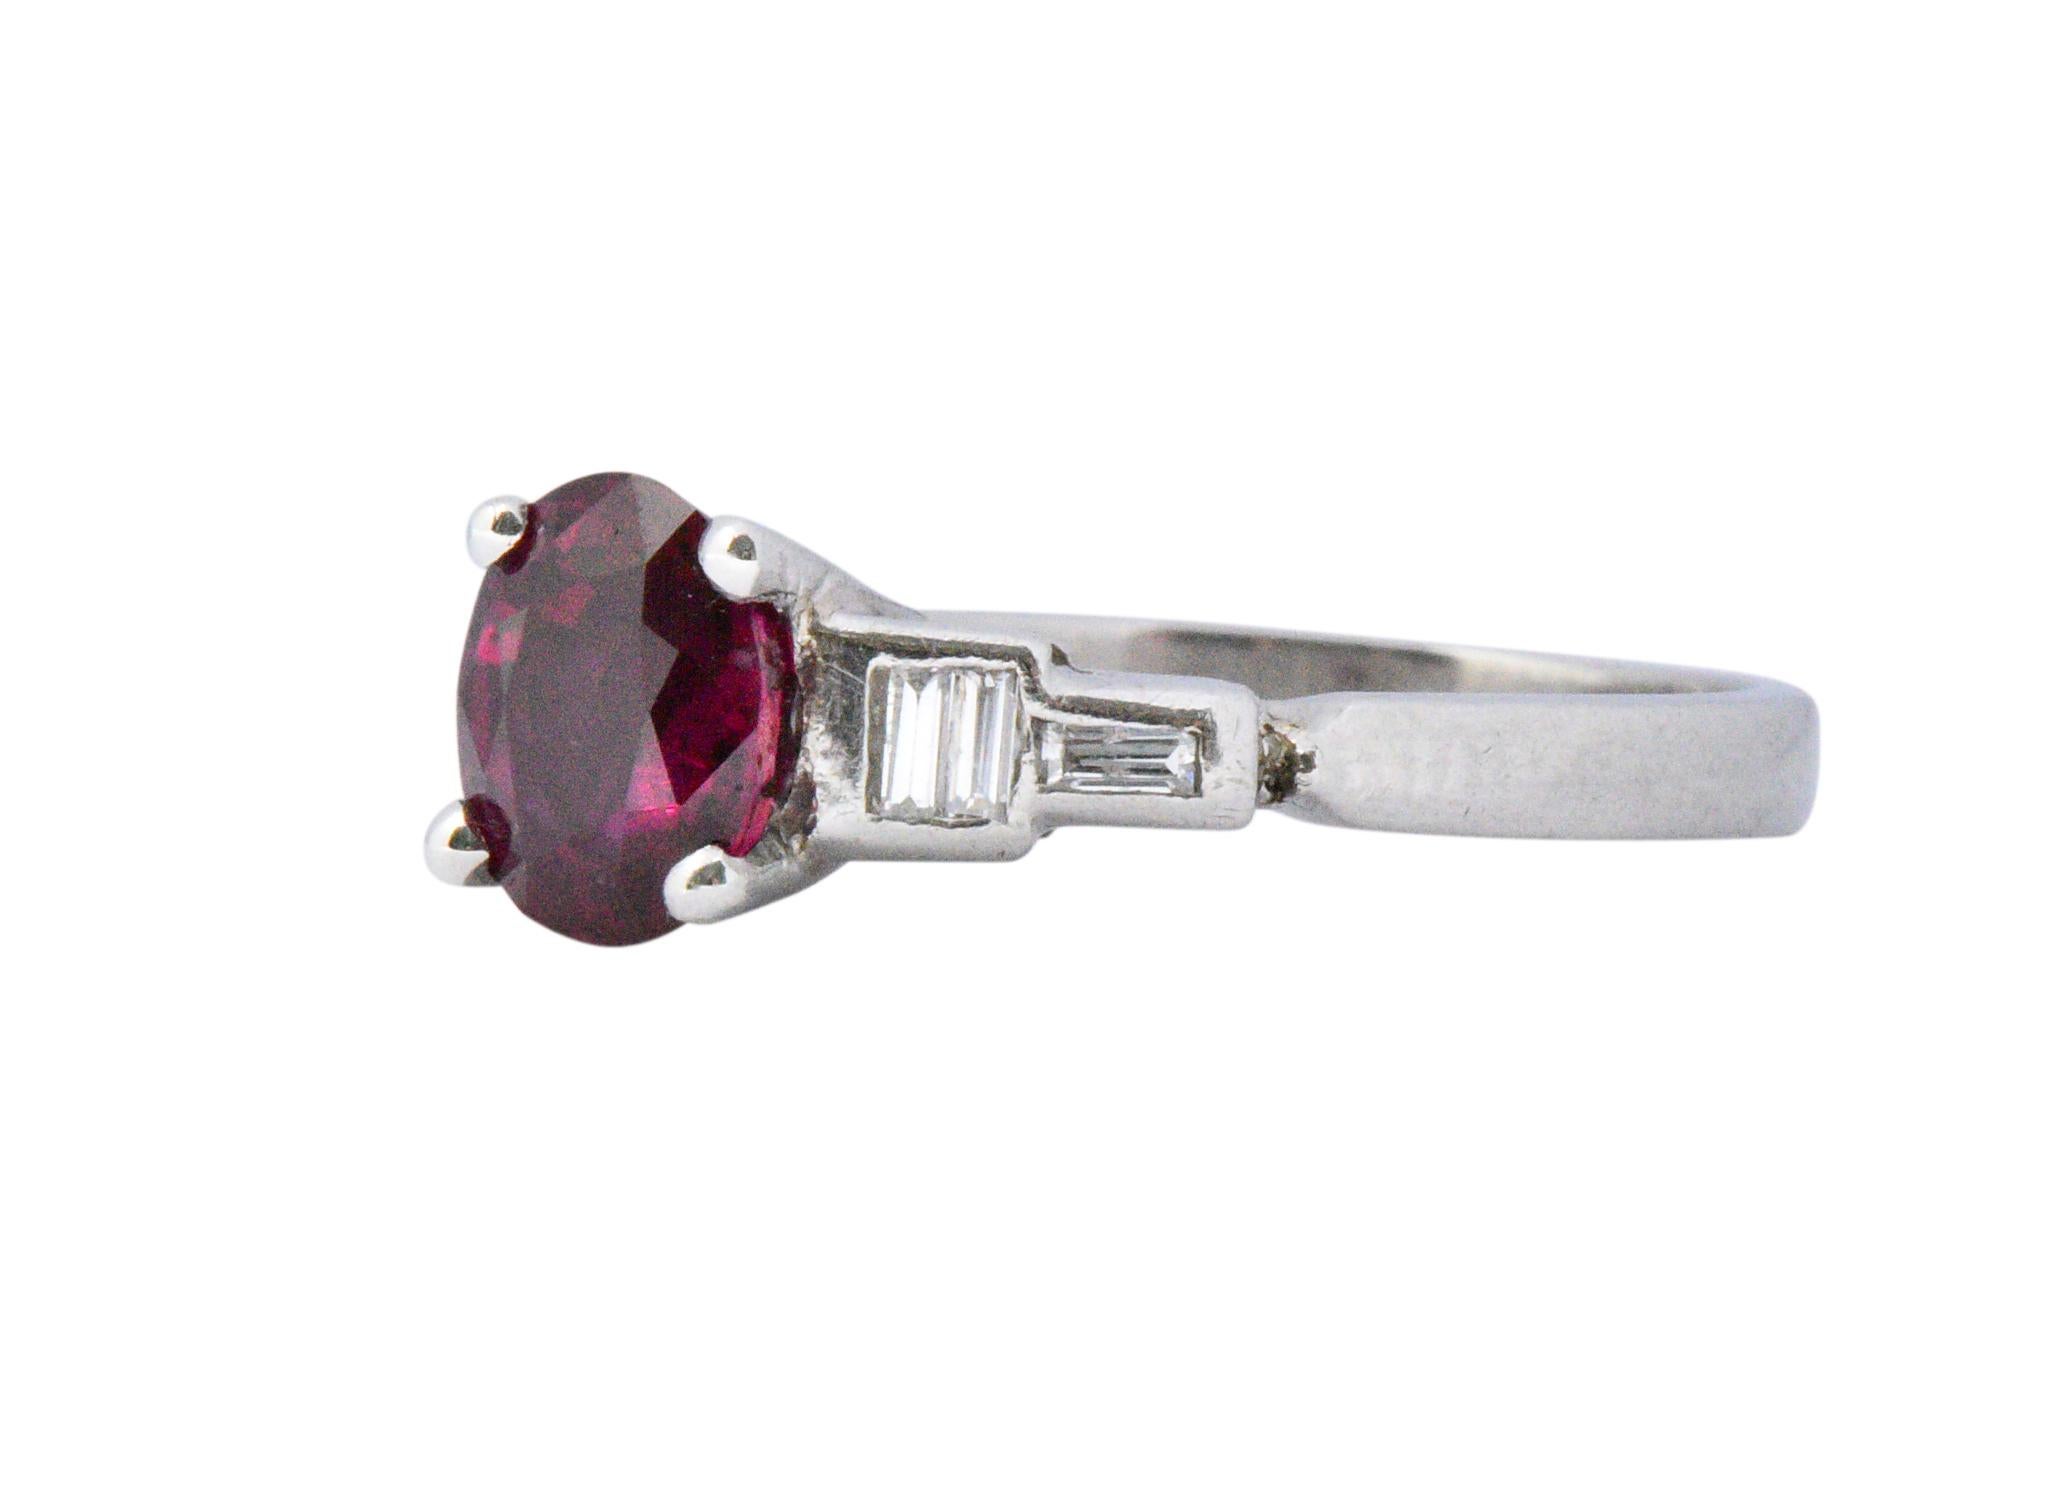 Centering a basket set oval cut ruby weighing approximately 1.51 carats; medium-dark and very slightly purplish-red in color

Flanked by channel set baguette cut diamonds weighing approximately 0.10 carat total; G/H color with VS to I clarity

1.61